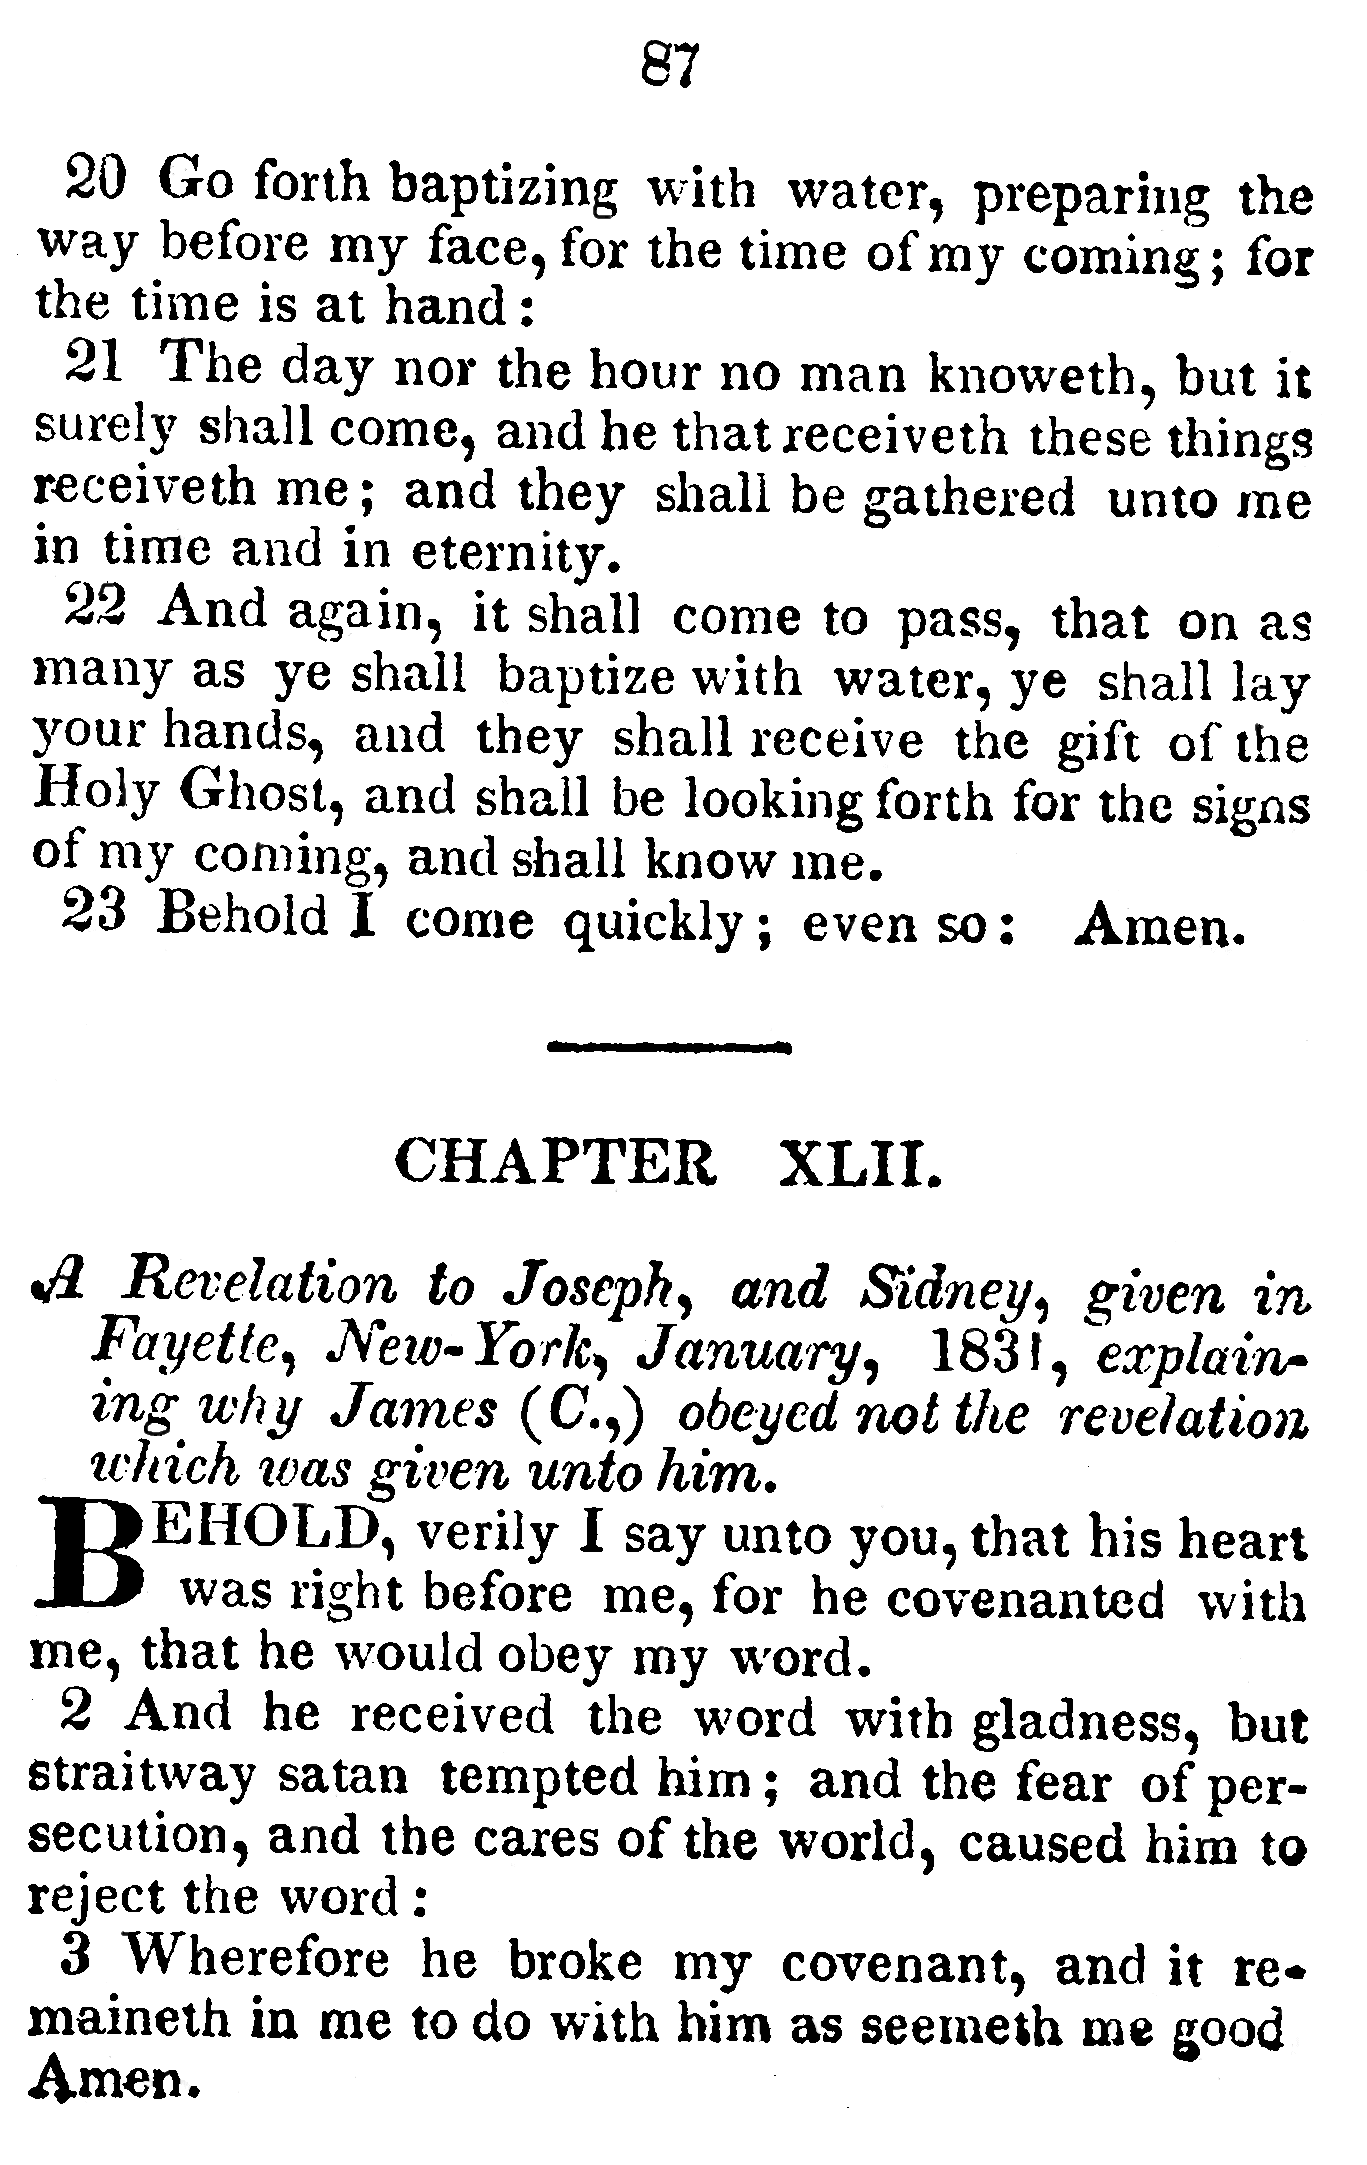 Book Of Commandments 1833 Page 87